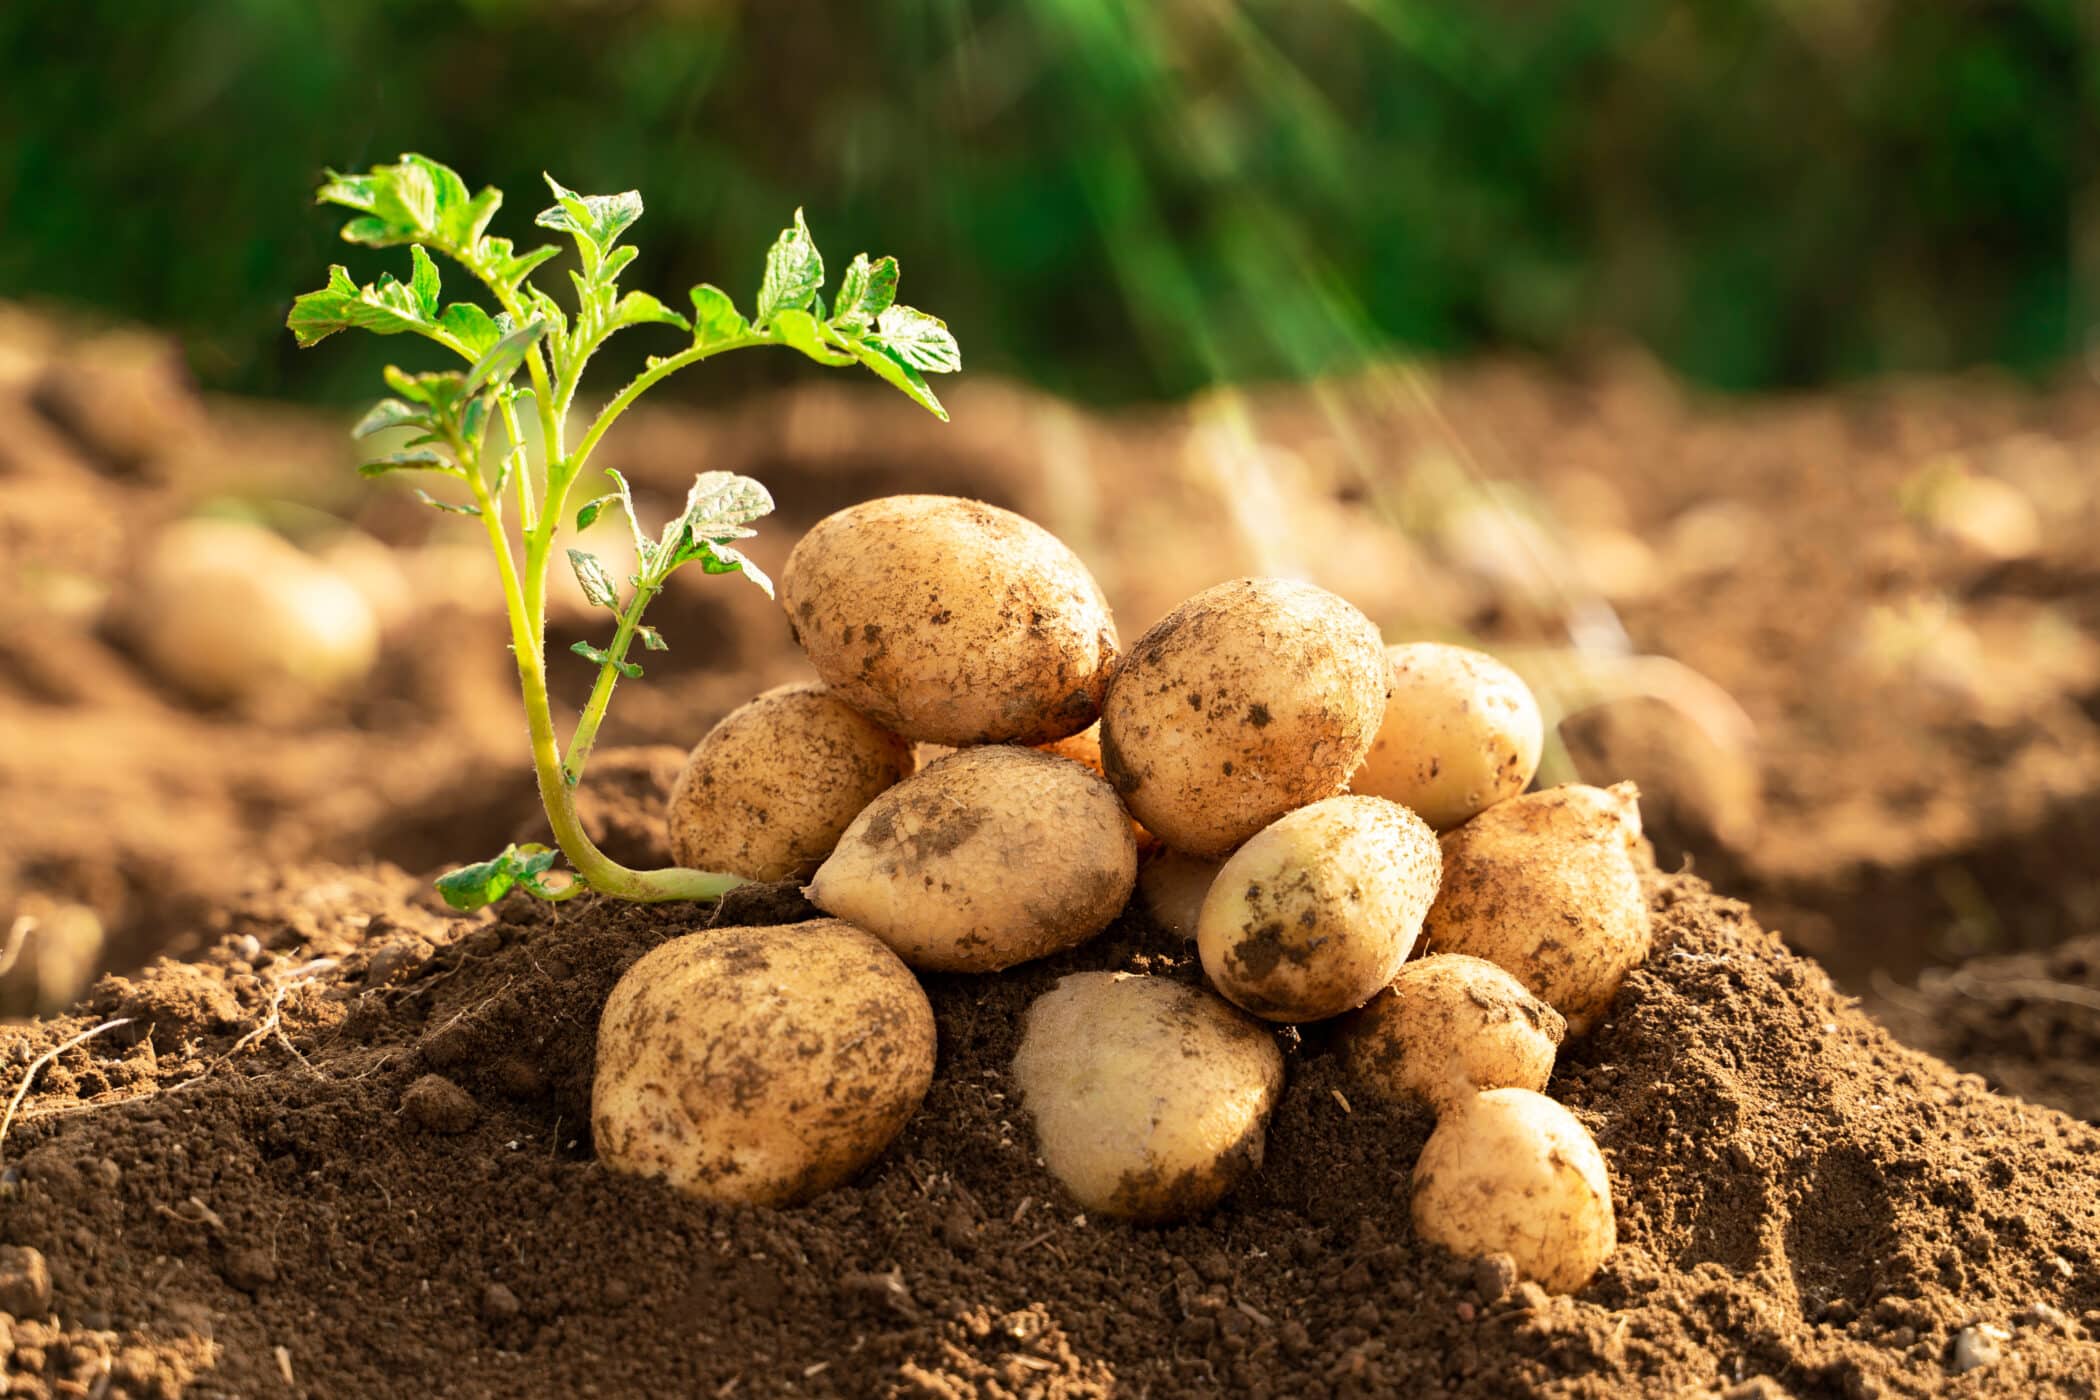 How to grow your own Potatoes